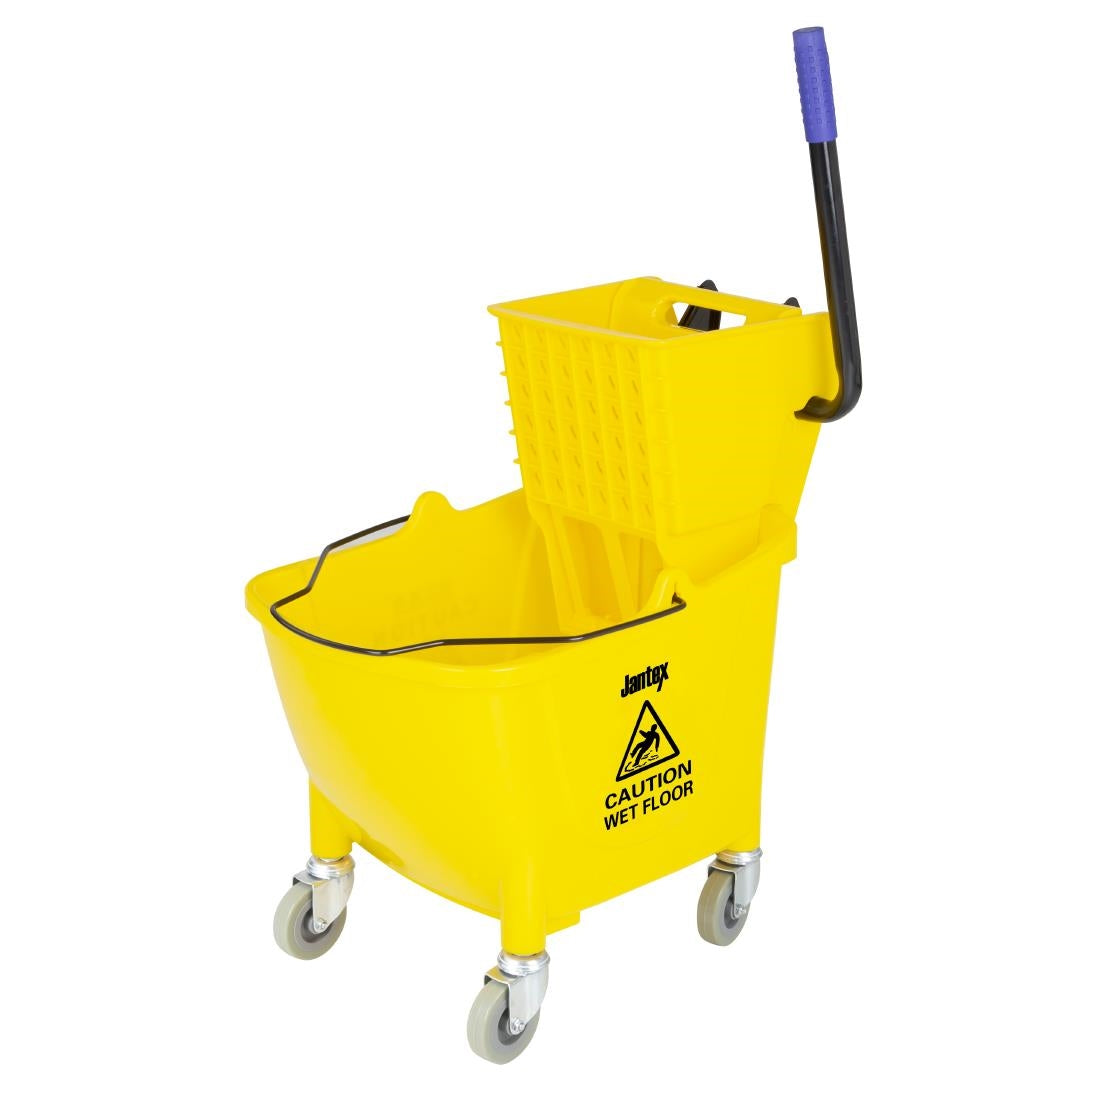 FW866 Jantex 30ltr Mop Bucket with Foot Pedal release - Yellow